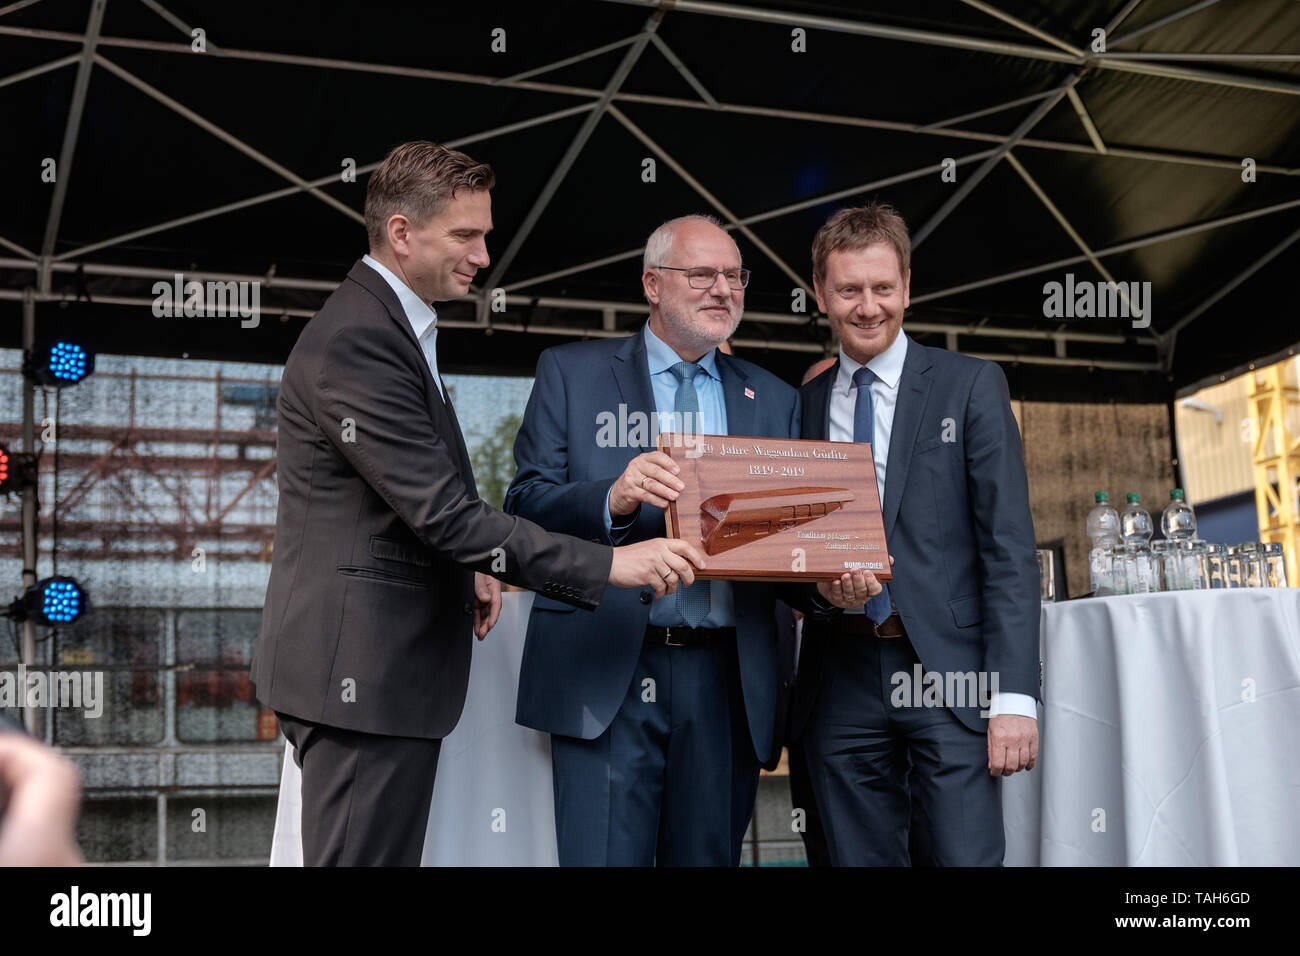 Görlitz, Germany, May 25, 2019 - Martin Dulig, Minister of Transport of Saxony; Carsten Liebig, Plant Manager Bombardier Görlitz and Michael Kretschmer, Prime Minister of Saxony;  (from l.t.r.) on the occasion of the anniversary 170 years wagon construction in Görlitz on 25 May 2019. Stock Photo